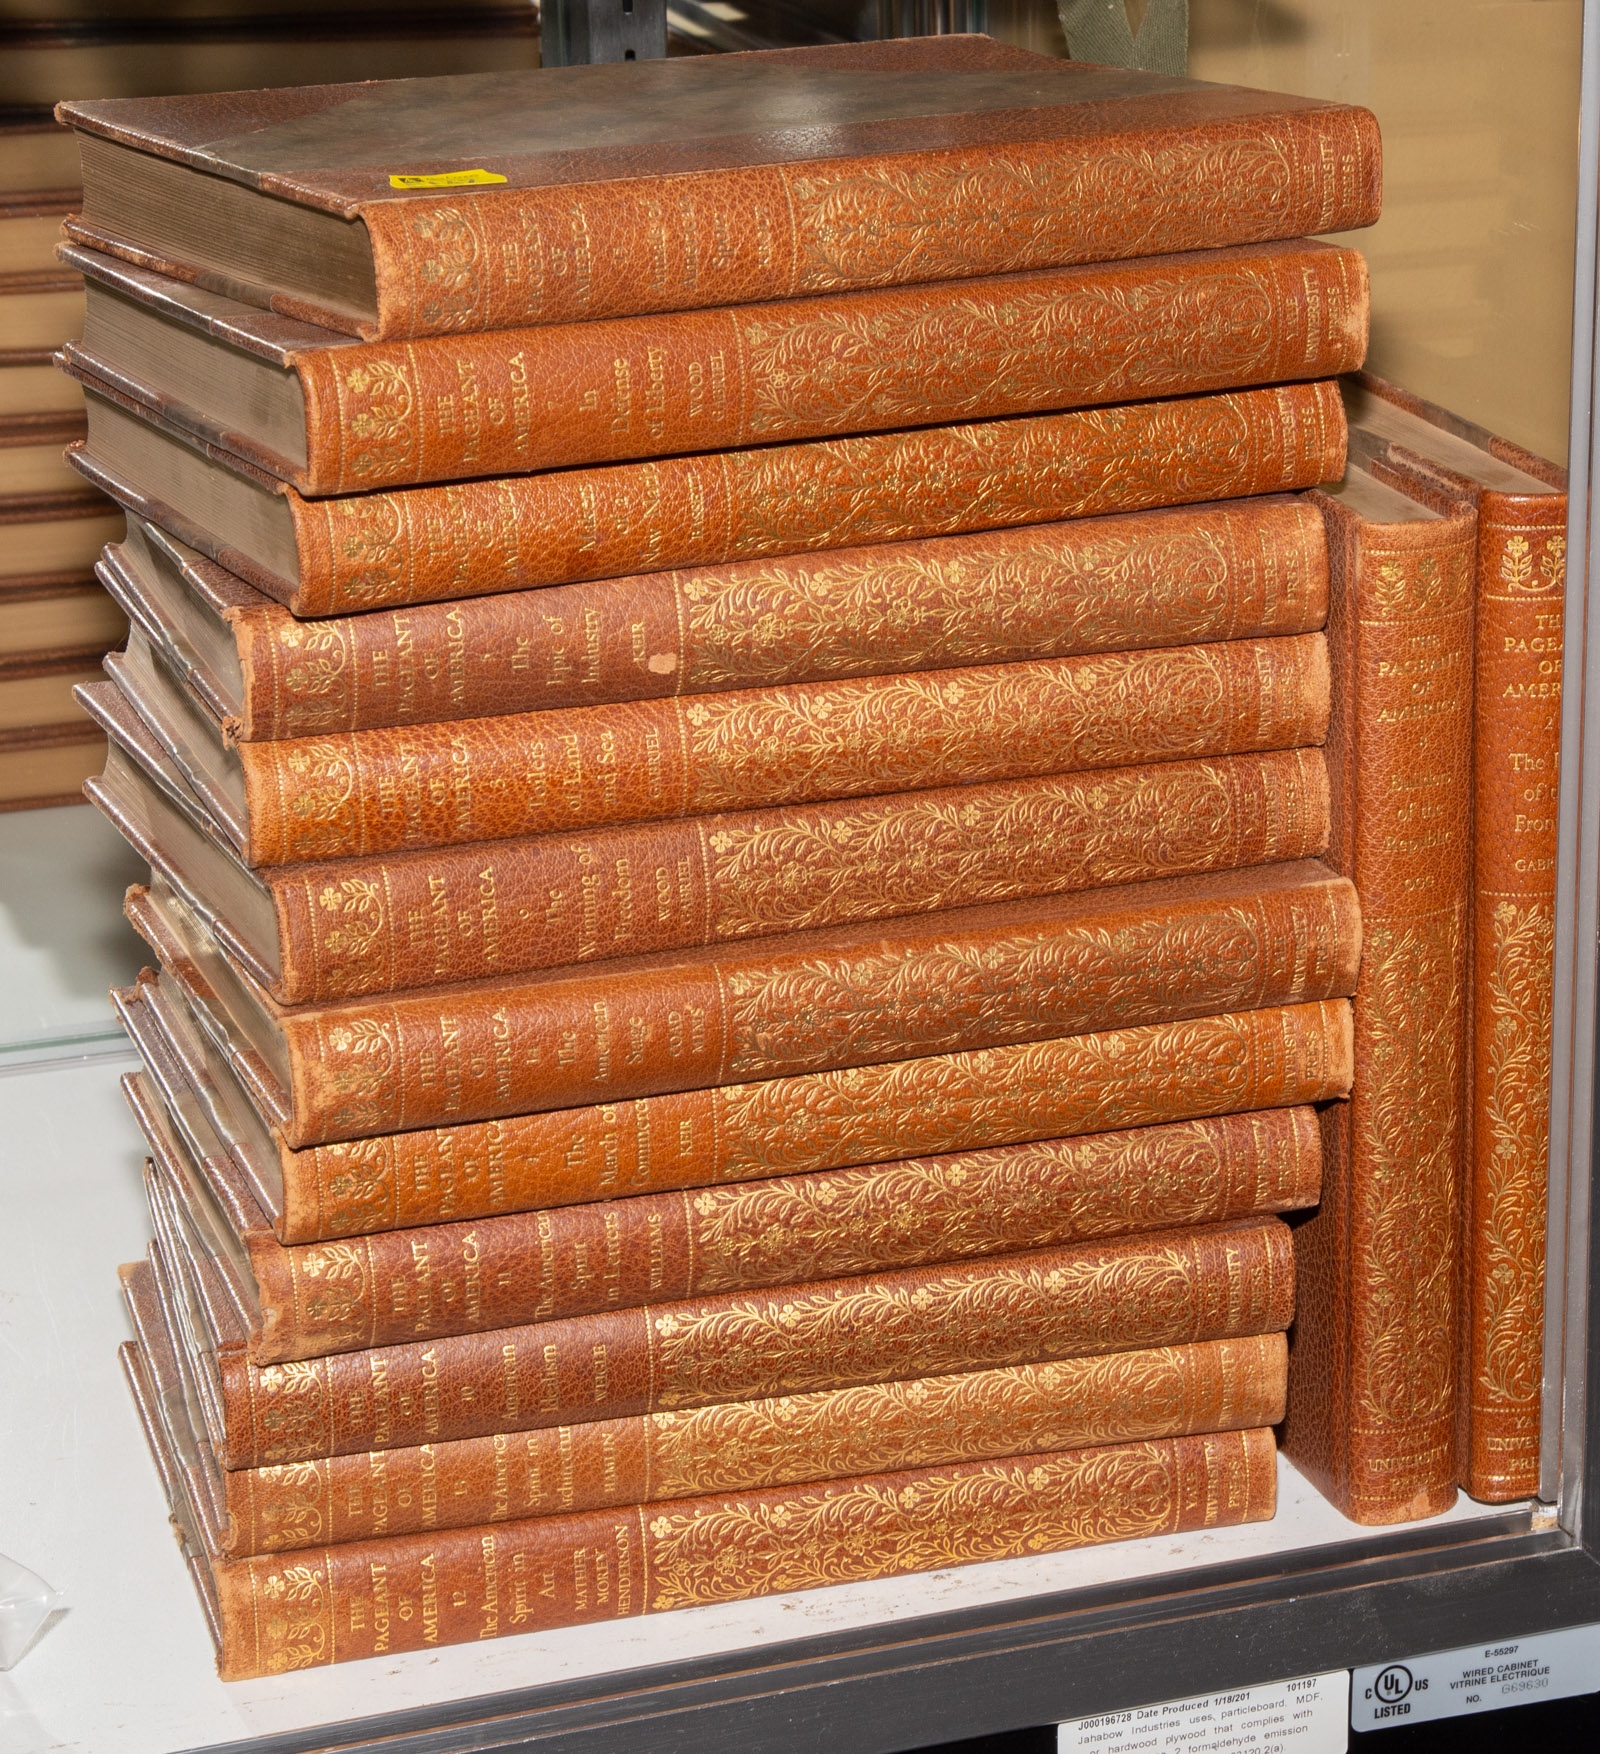 14 VOLUMES "THE PAGEANT OF AMERICA"